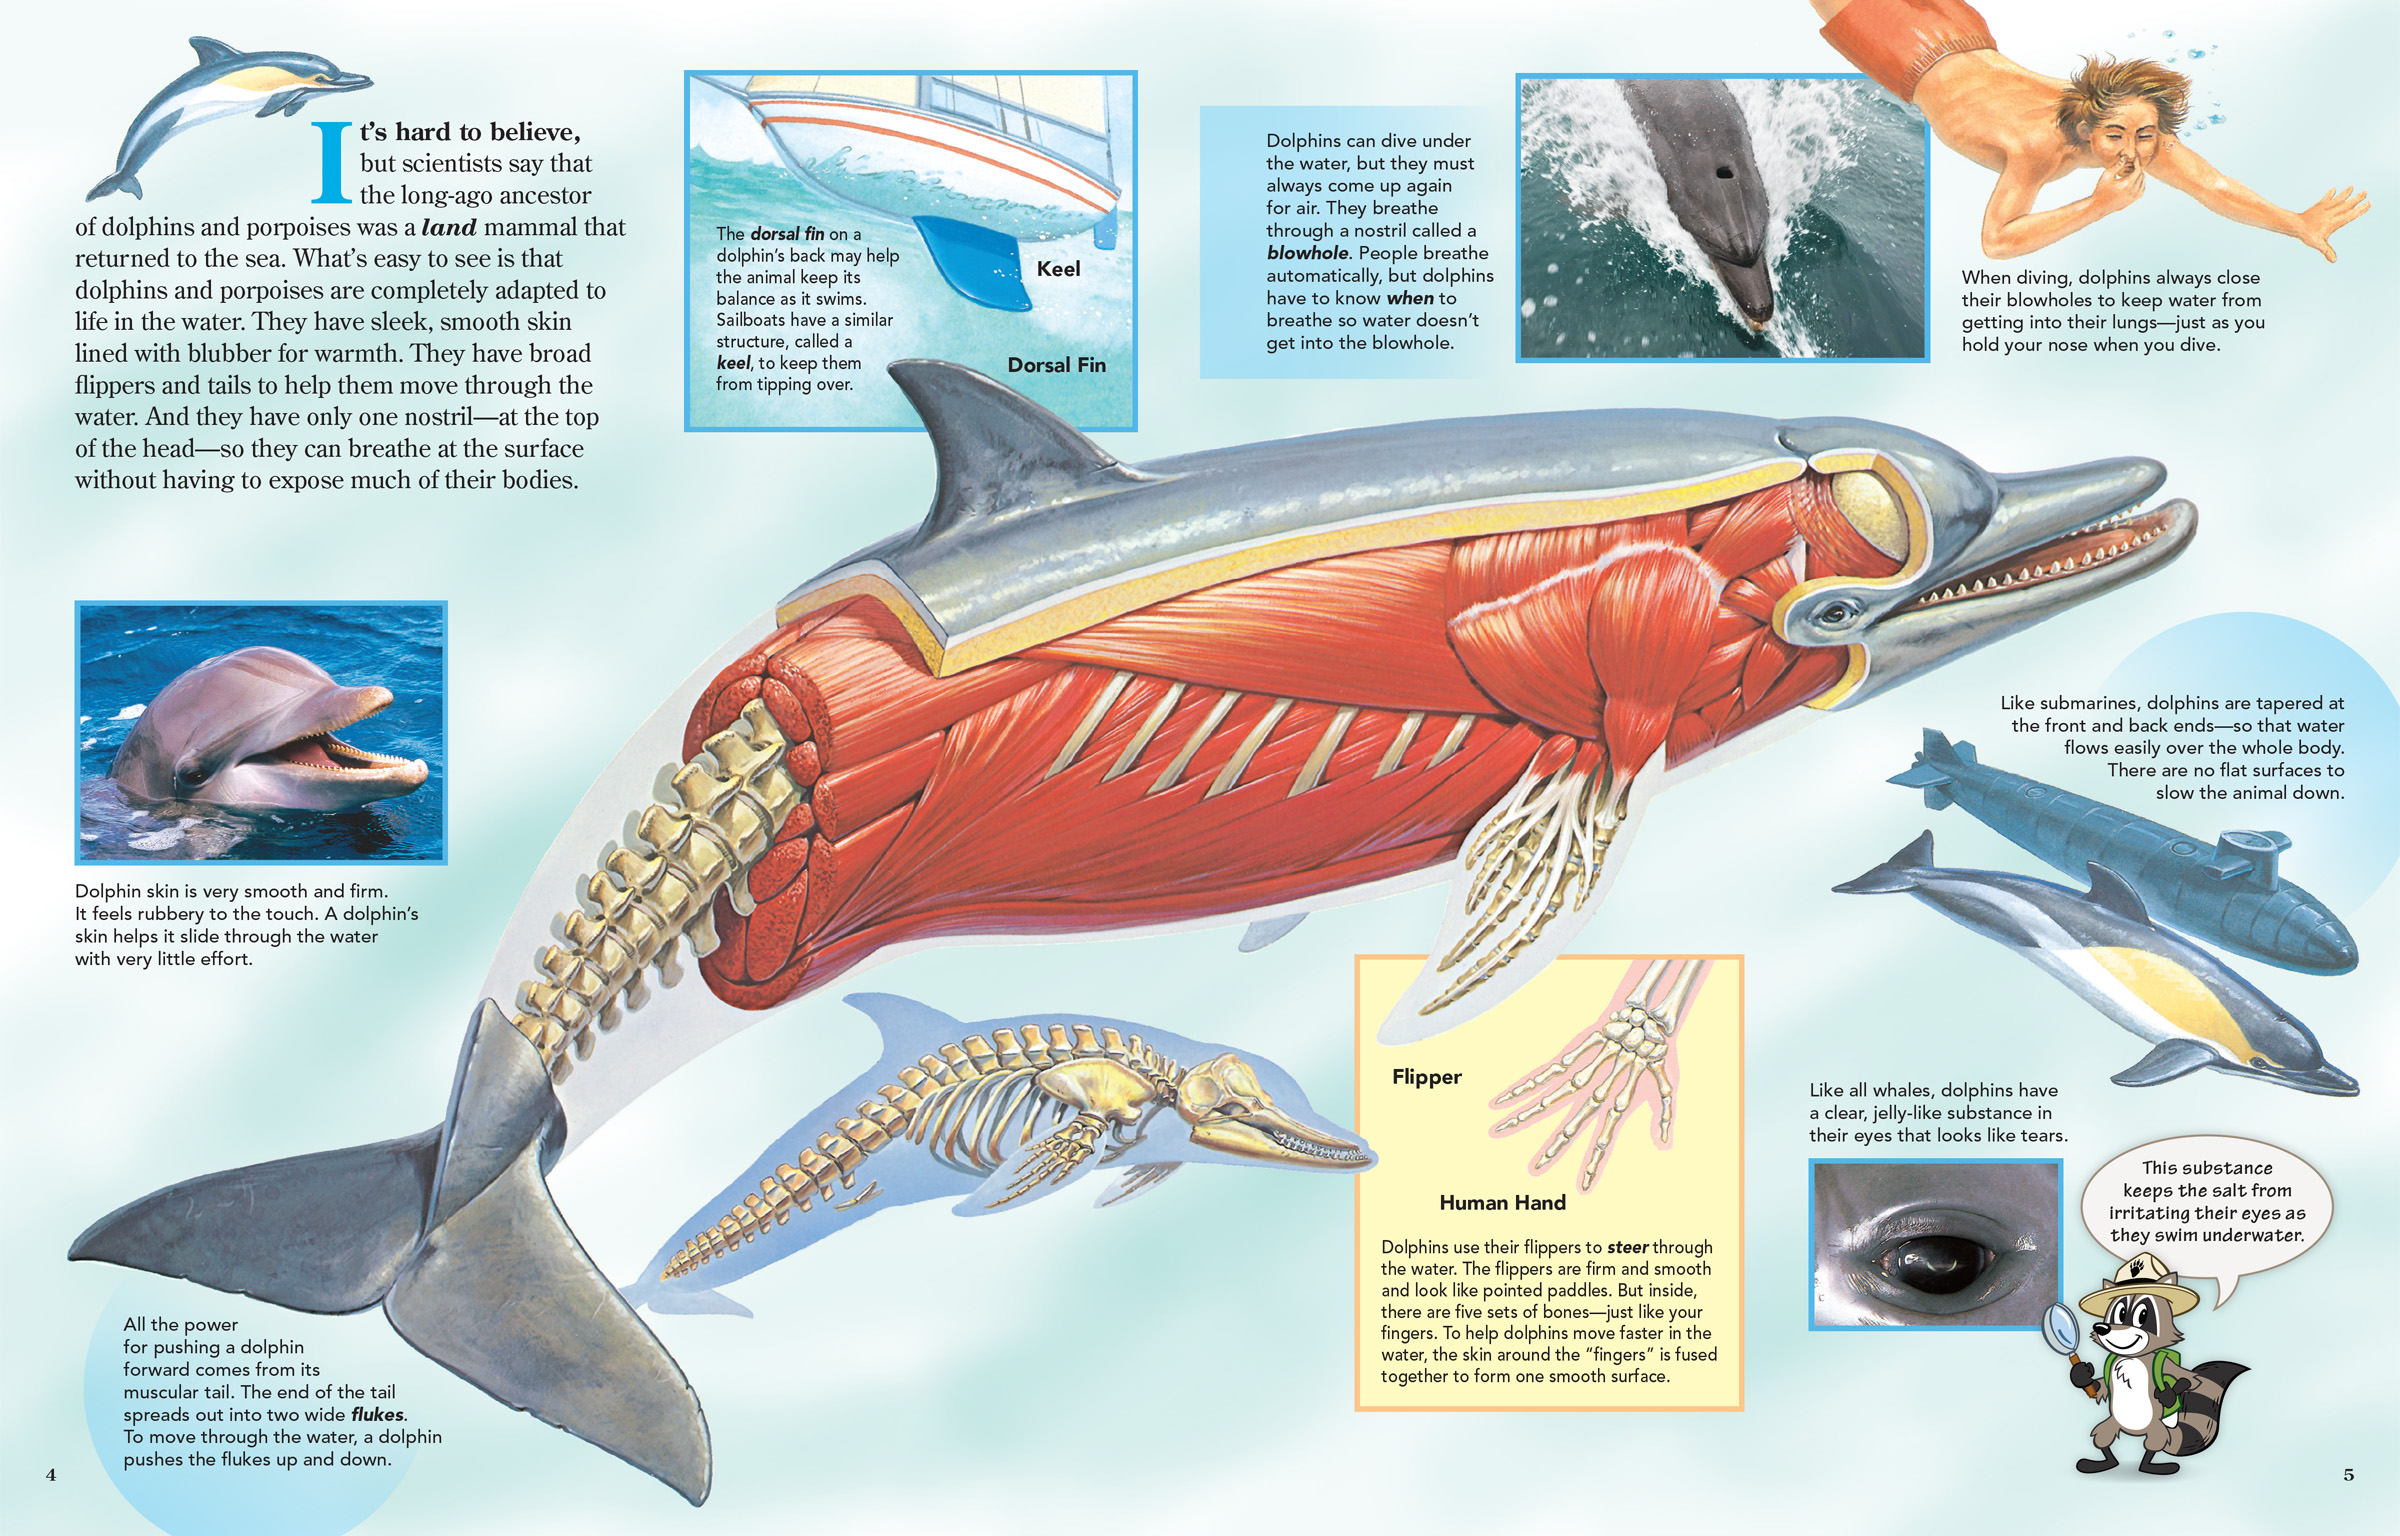 Anatomy of a dolphin, showing muscles, bones, and highlighting features such as eyes, skin, and fins.